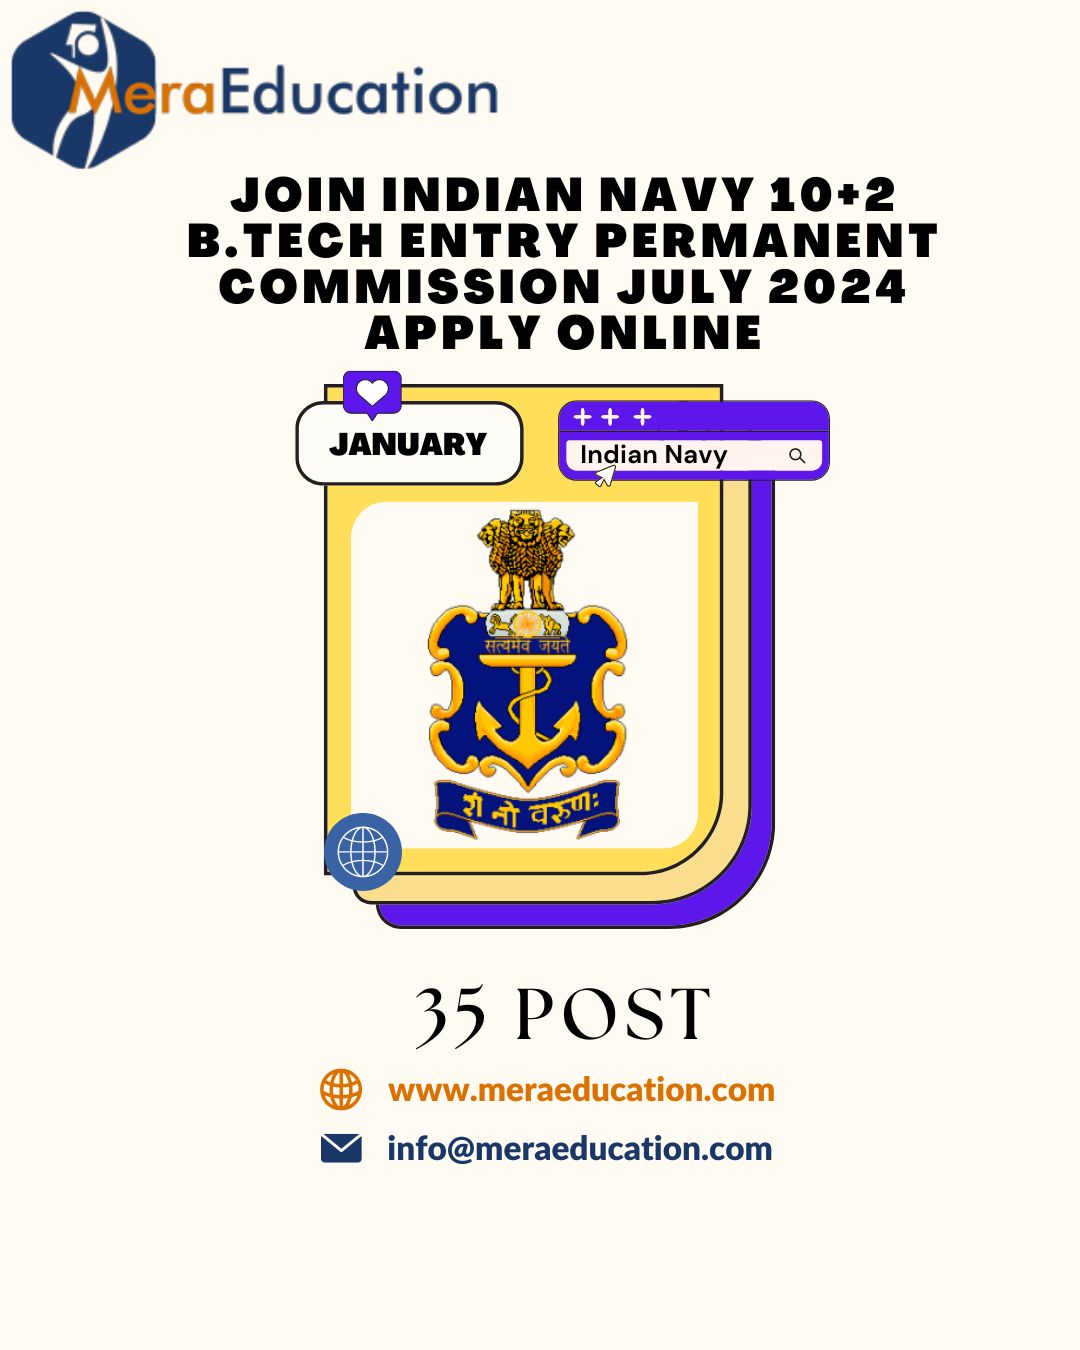 Join Indian Navy 10+2 B.Tech Entry Permanent Commission